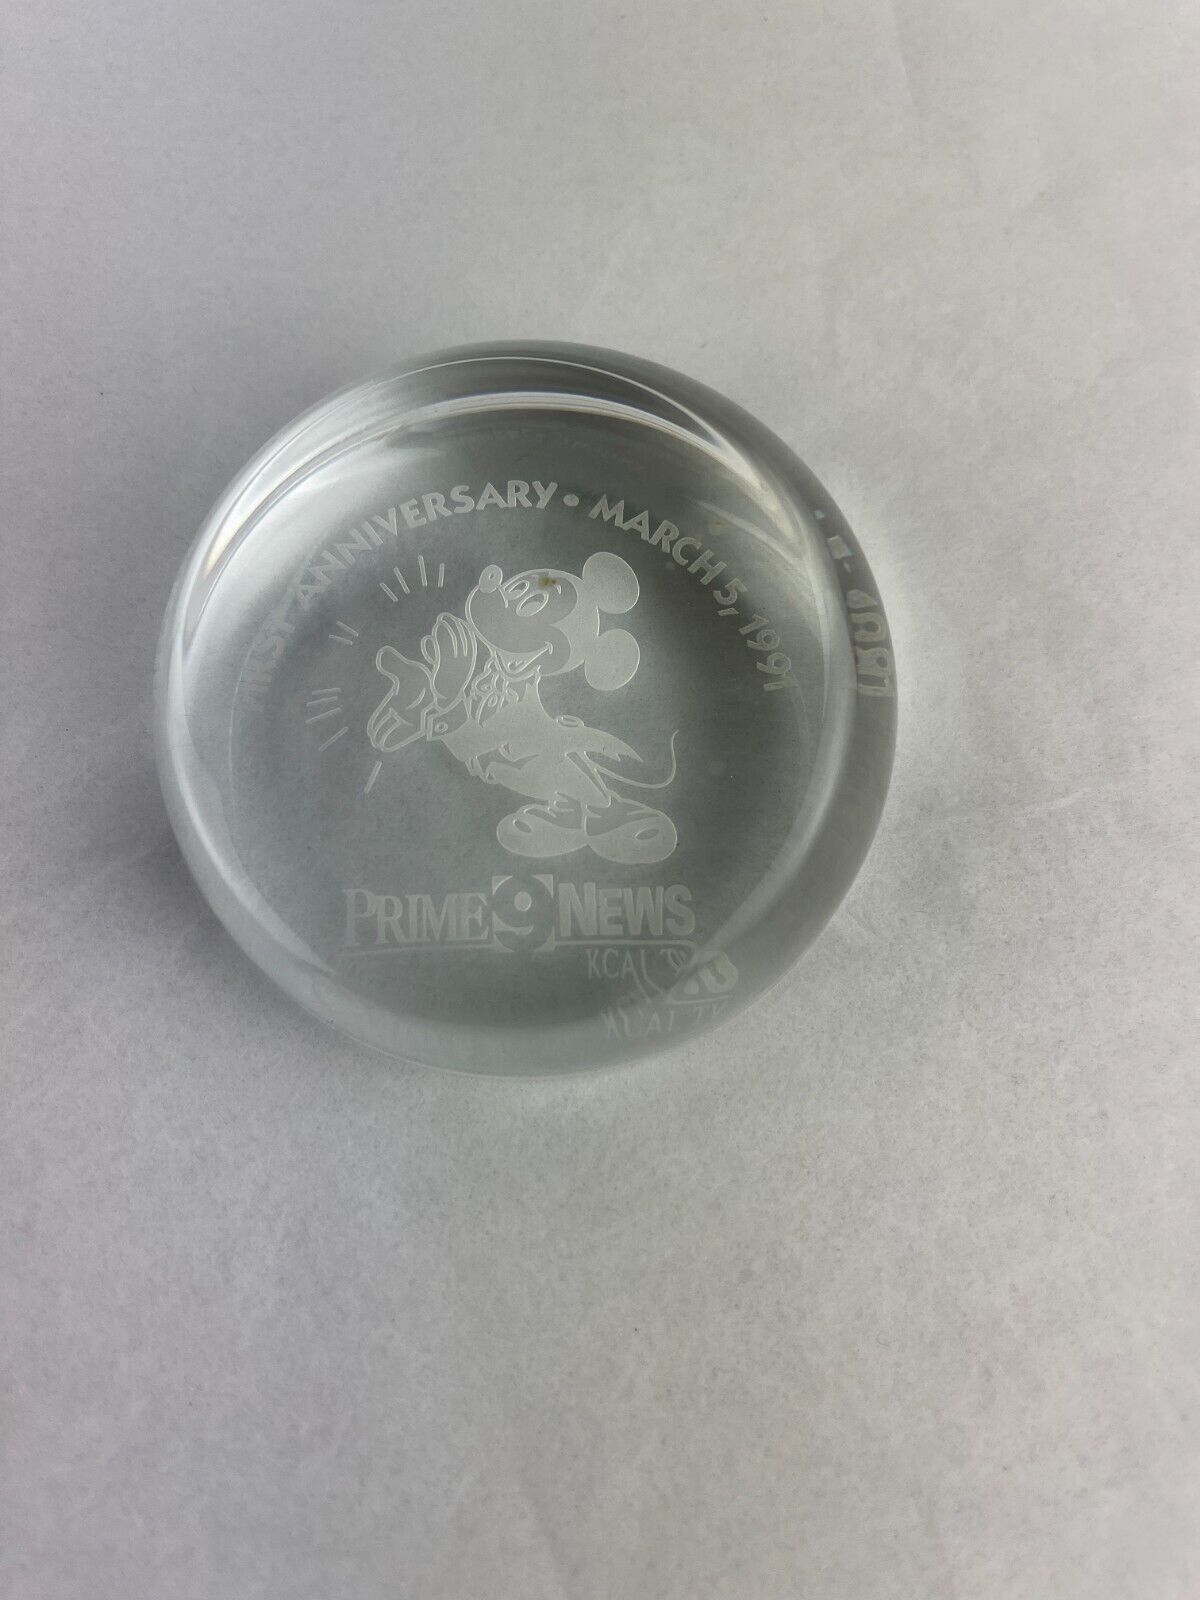 Disney Mickey Glass Paperweight KCALTV Prime News First Anniversary March 5 1991